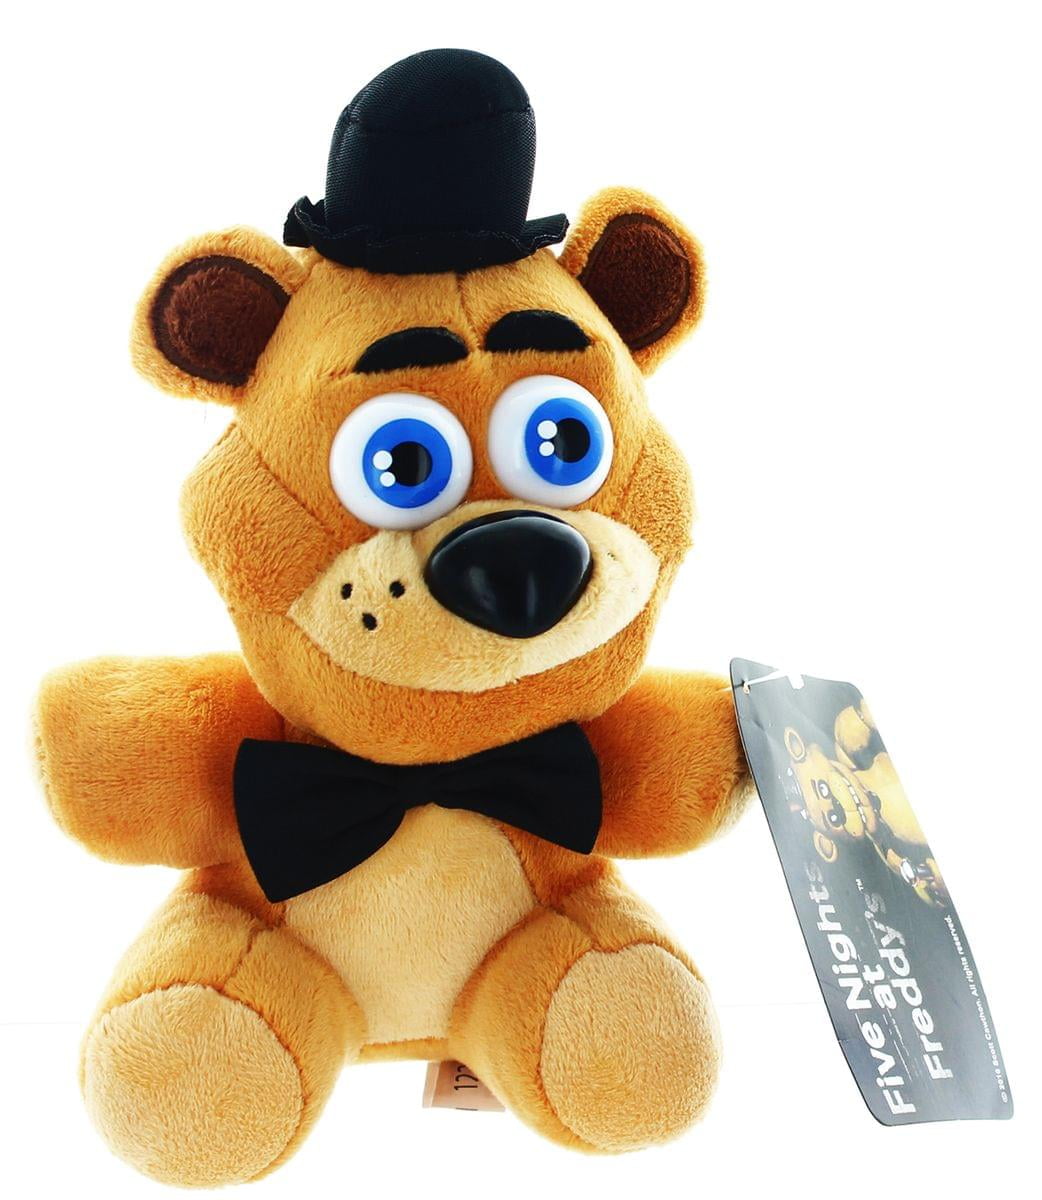 FNAF Golden Freddy Funko Plush Five Nights at Freddy's Wave 1 Exclusive  2016